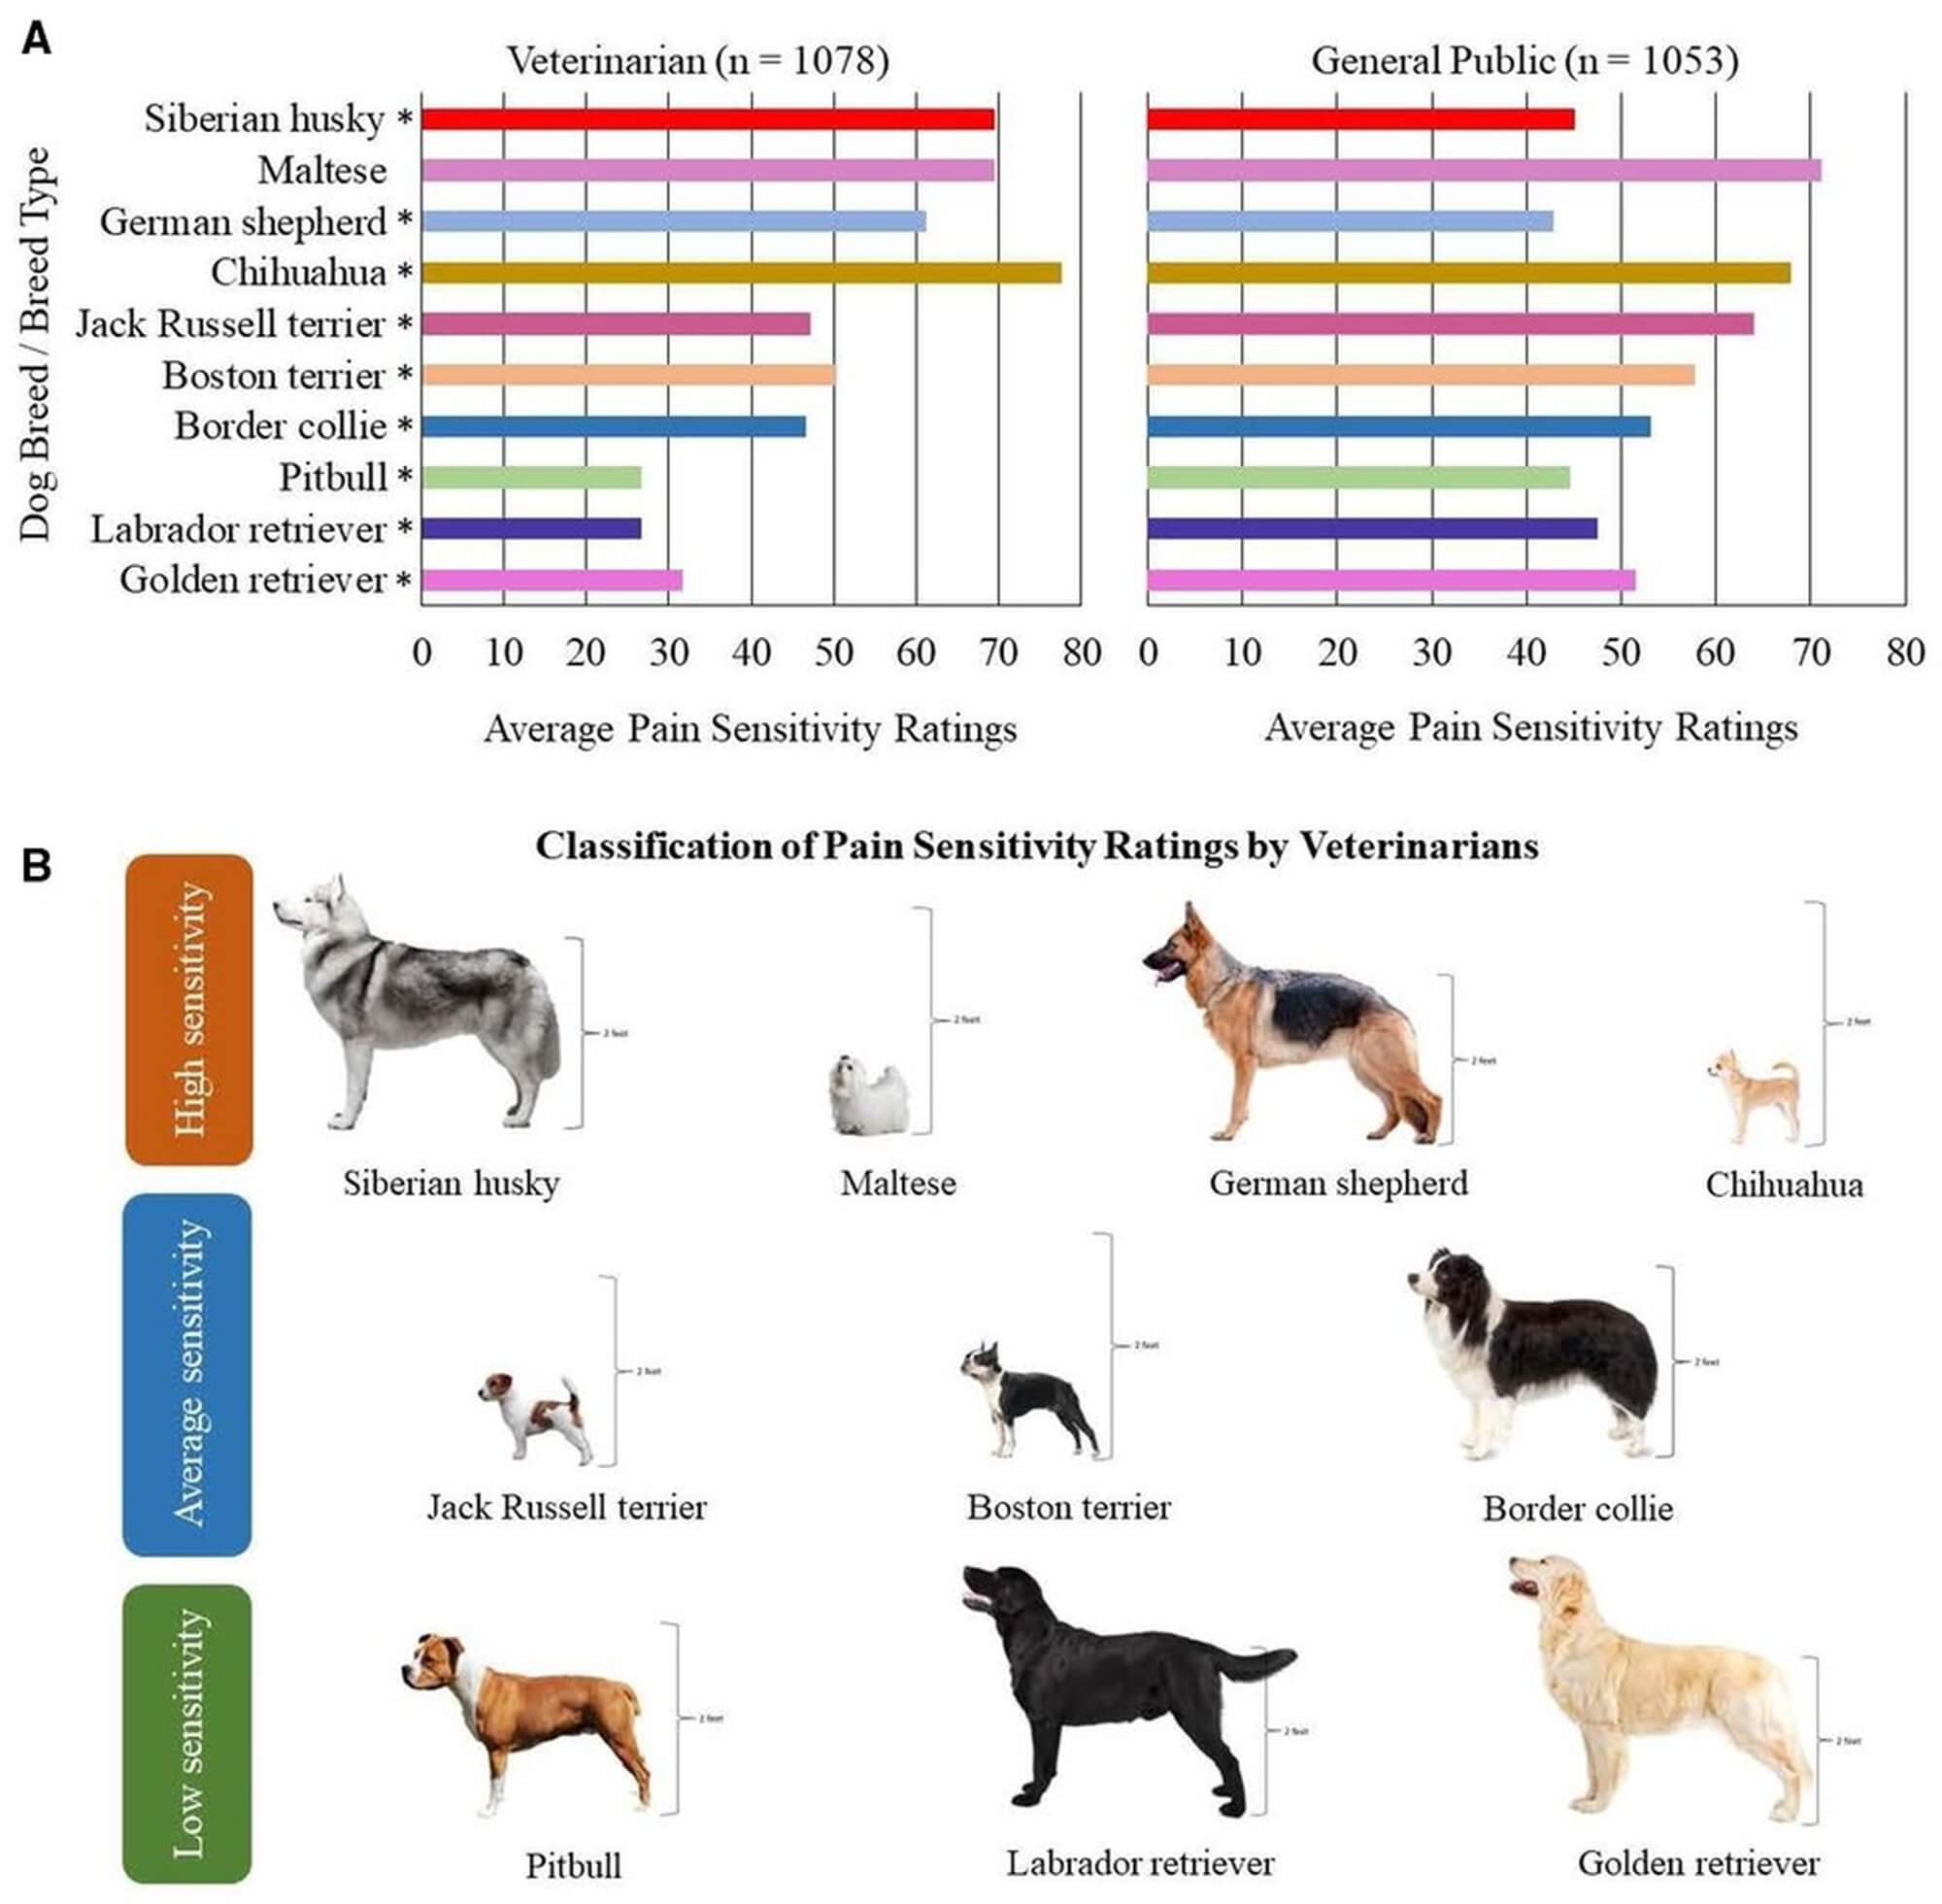 FIGURE 1. Ten dog breeds/breed types selected for study inclusion. (A) Findings from Gruen et al. (1) demonstrating the average pain sensitivity ratings by both veterinarians and general public members for the ten dog breeds selected. The scale ranged from 0 = not at all sensitive to 100 = most sensitive imaginable. In Gruen et al. (1), median pain sensitivity ratings between veterinarians and the general public were compared using two-sample t-tests, and p-values = 0.001 are indicated using asterisks (*). (B) Visual representation of the ten dog breeds/breed types selected based on the classification of pain sensitivity ratings by veterinarians. Height is demonstrated for each breed, as consideration was provided to include dog breeds/breed types of varying sizes.